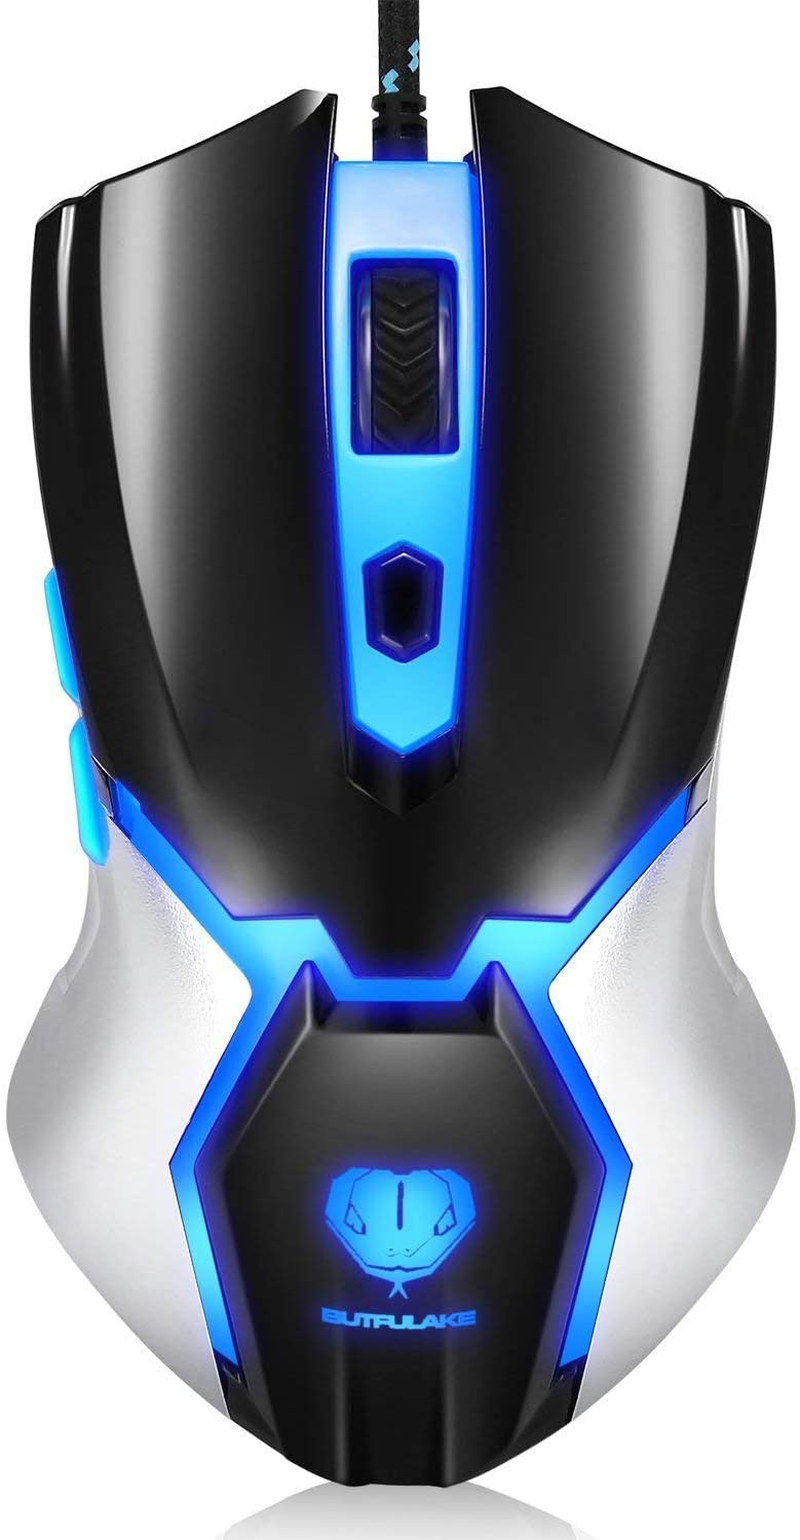 Gaming Mouse,Usb Wired PC Gaming Mice, 3200 DPI with 4 Adjustable Levels, Comfortable Ergonomic Grip Design with Blue LED, 6 Programmable Buttons for Pc,Notebook, Macbook ,Windows ,Vista Linux - Blue